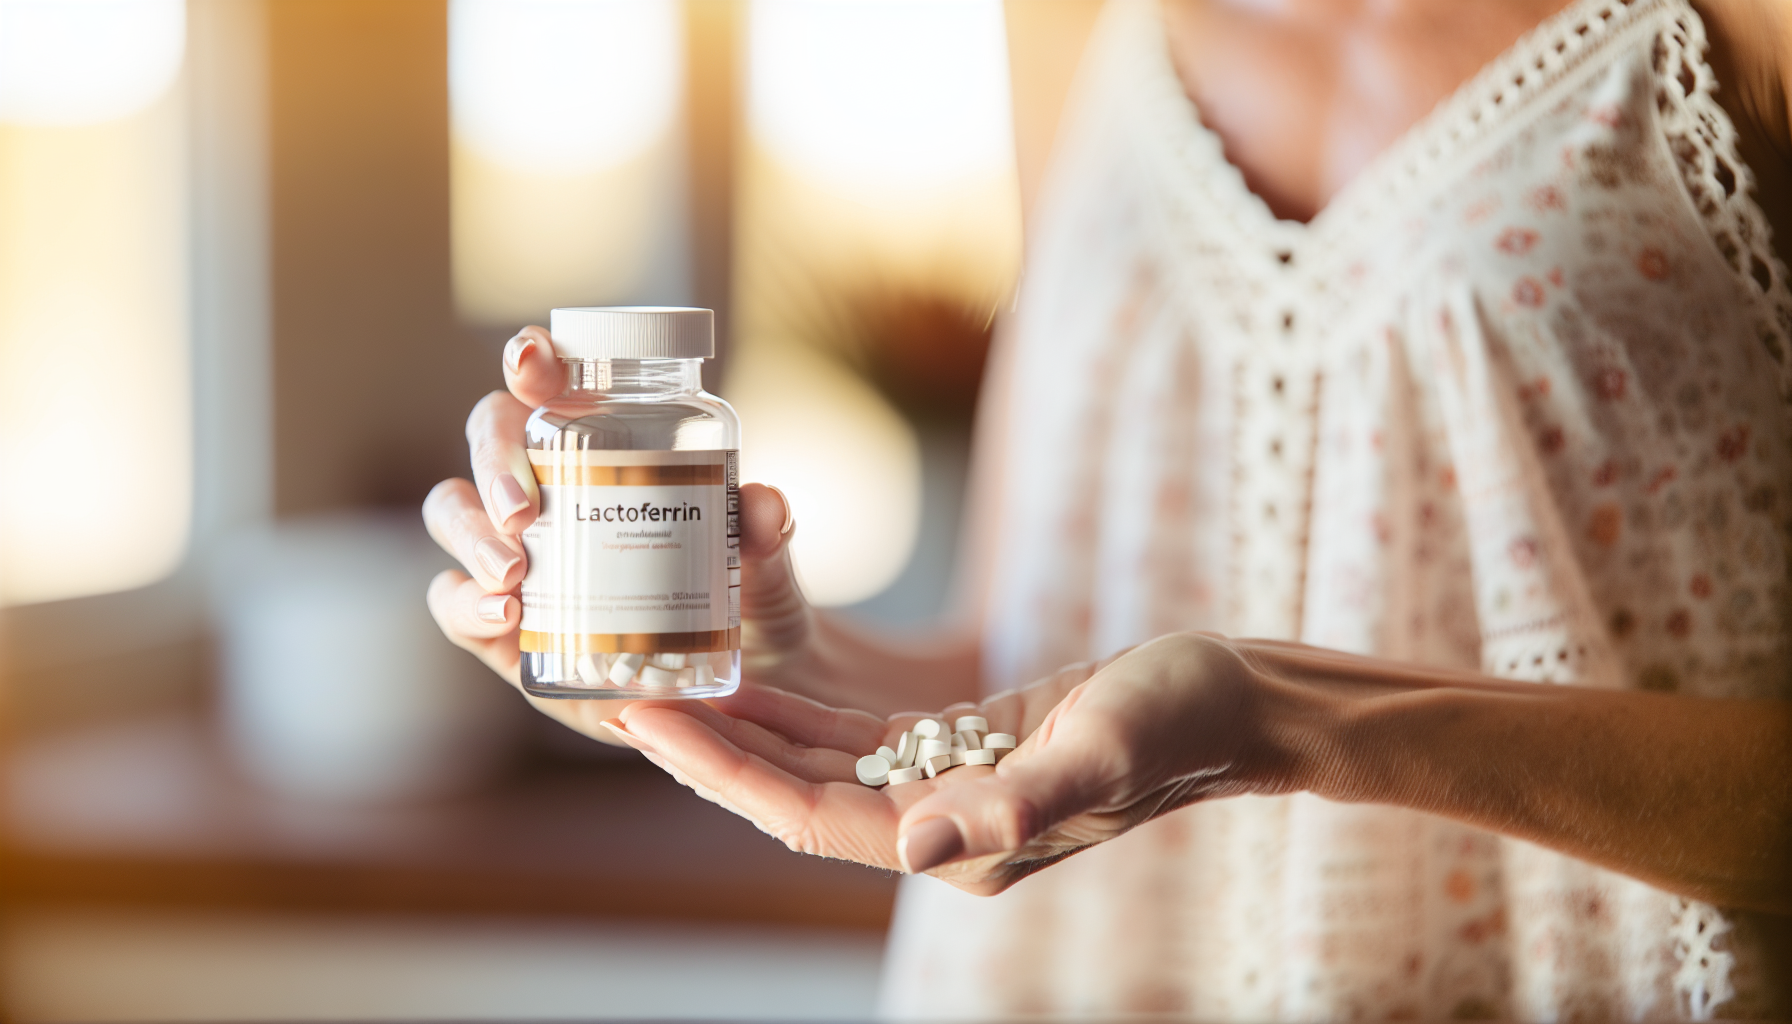 A photo of a hand holding a bottle of dietary supplements, highlighting the topic of lactoferrin supplementation and its potential health benefits.